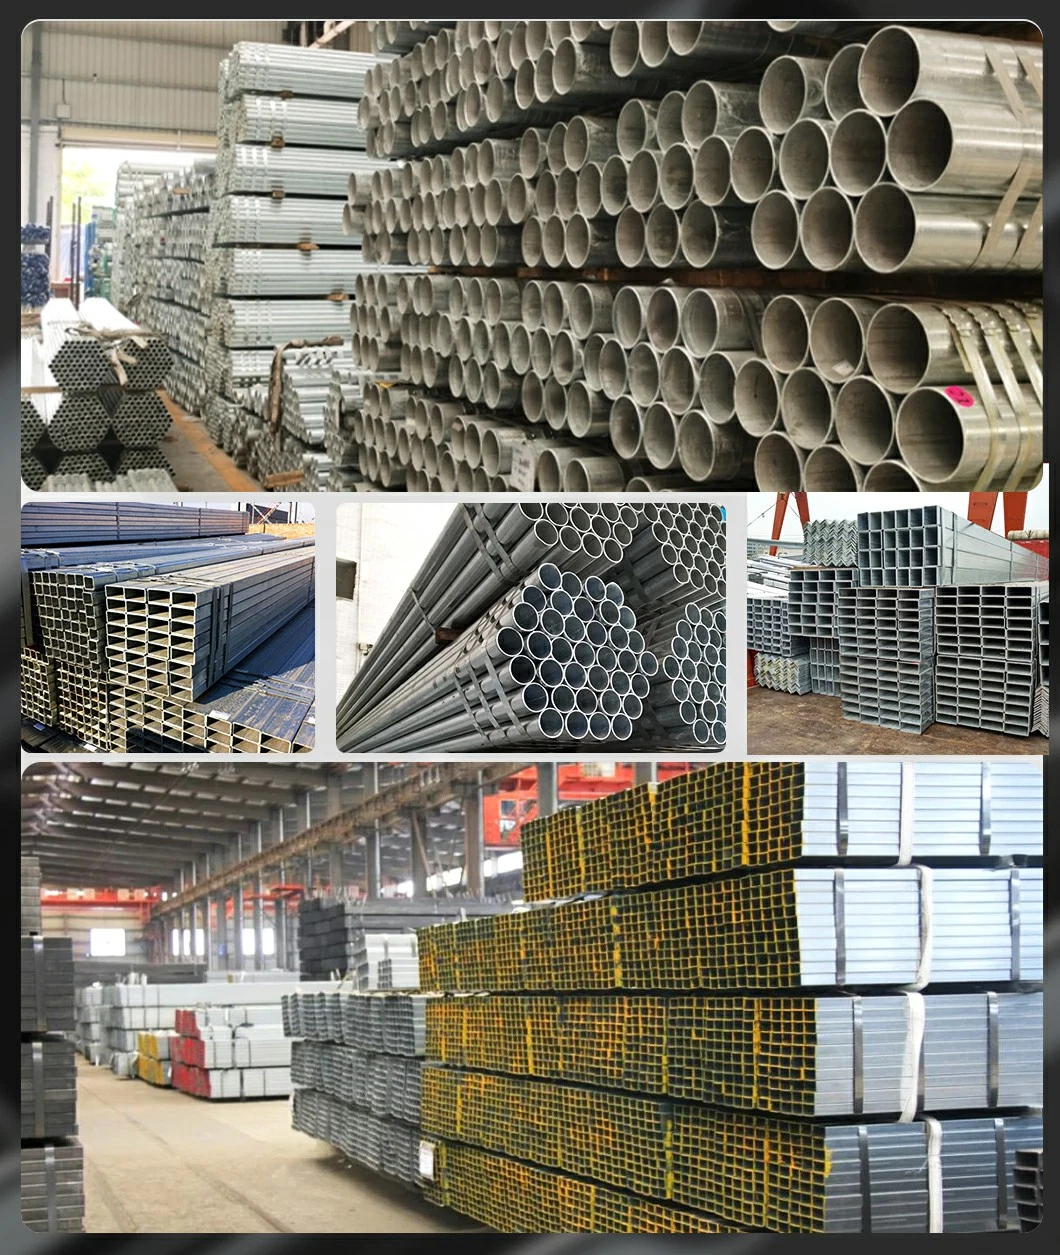 Best Price Pre Galvanized/Hot Dipped Galvanized Steel Square Pipe /Tube/Gi Galvanized Welded Square Hollow Steel Pipe Square Rectangular Metal Pipe